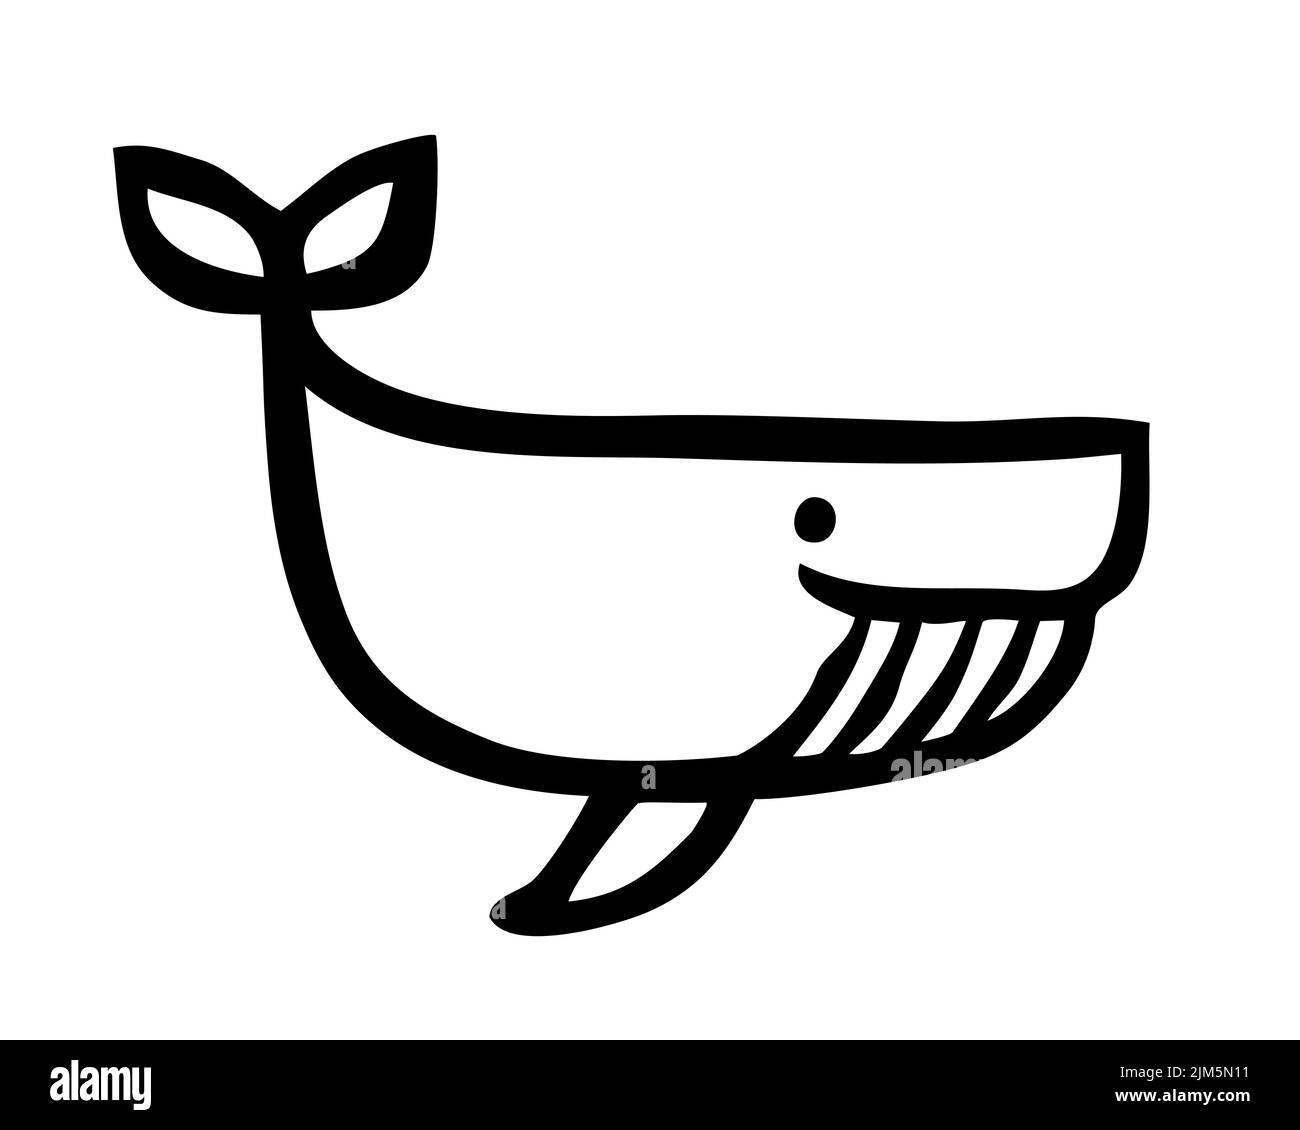 Cute cartoon whale hand painted with ink brush stroke, isolated on white background. Grunge vector illustration Stock Vector